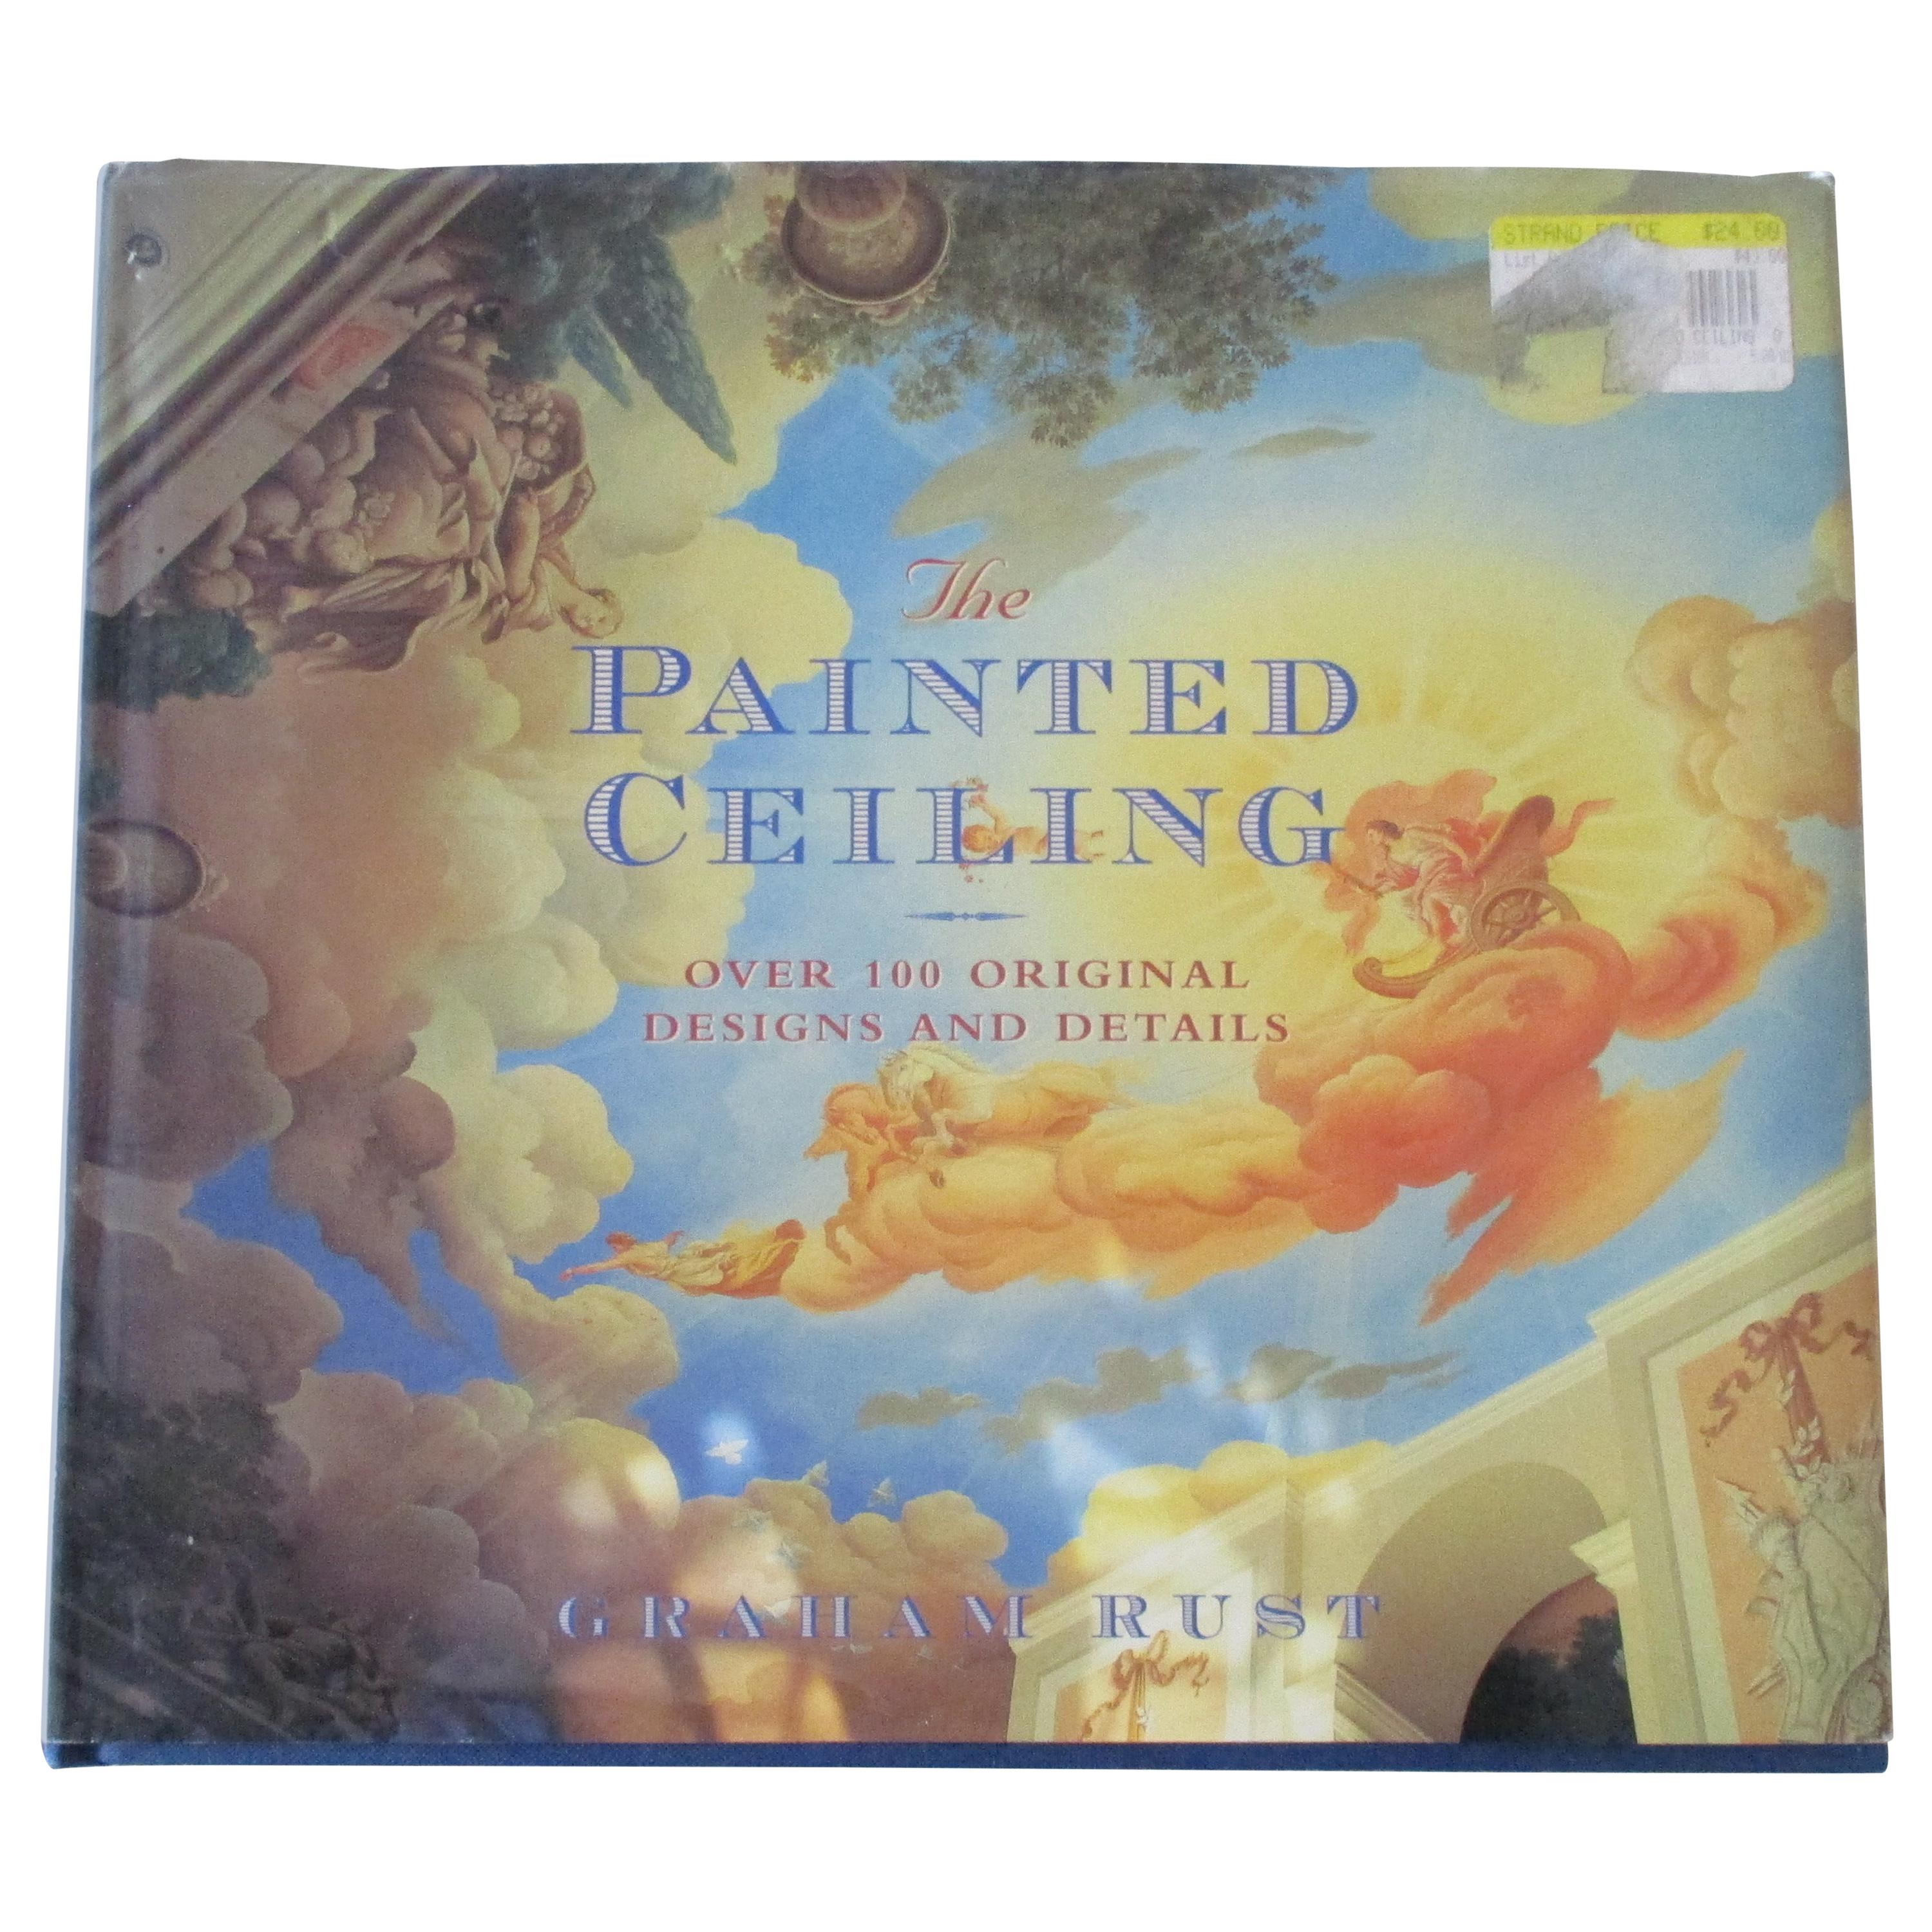 The Painted Ceiling Hardcover Book